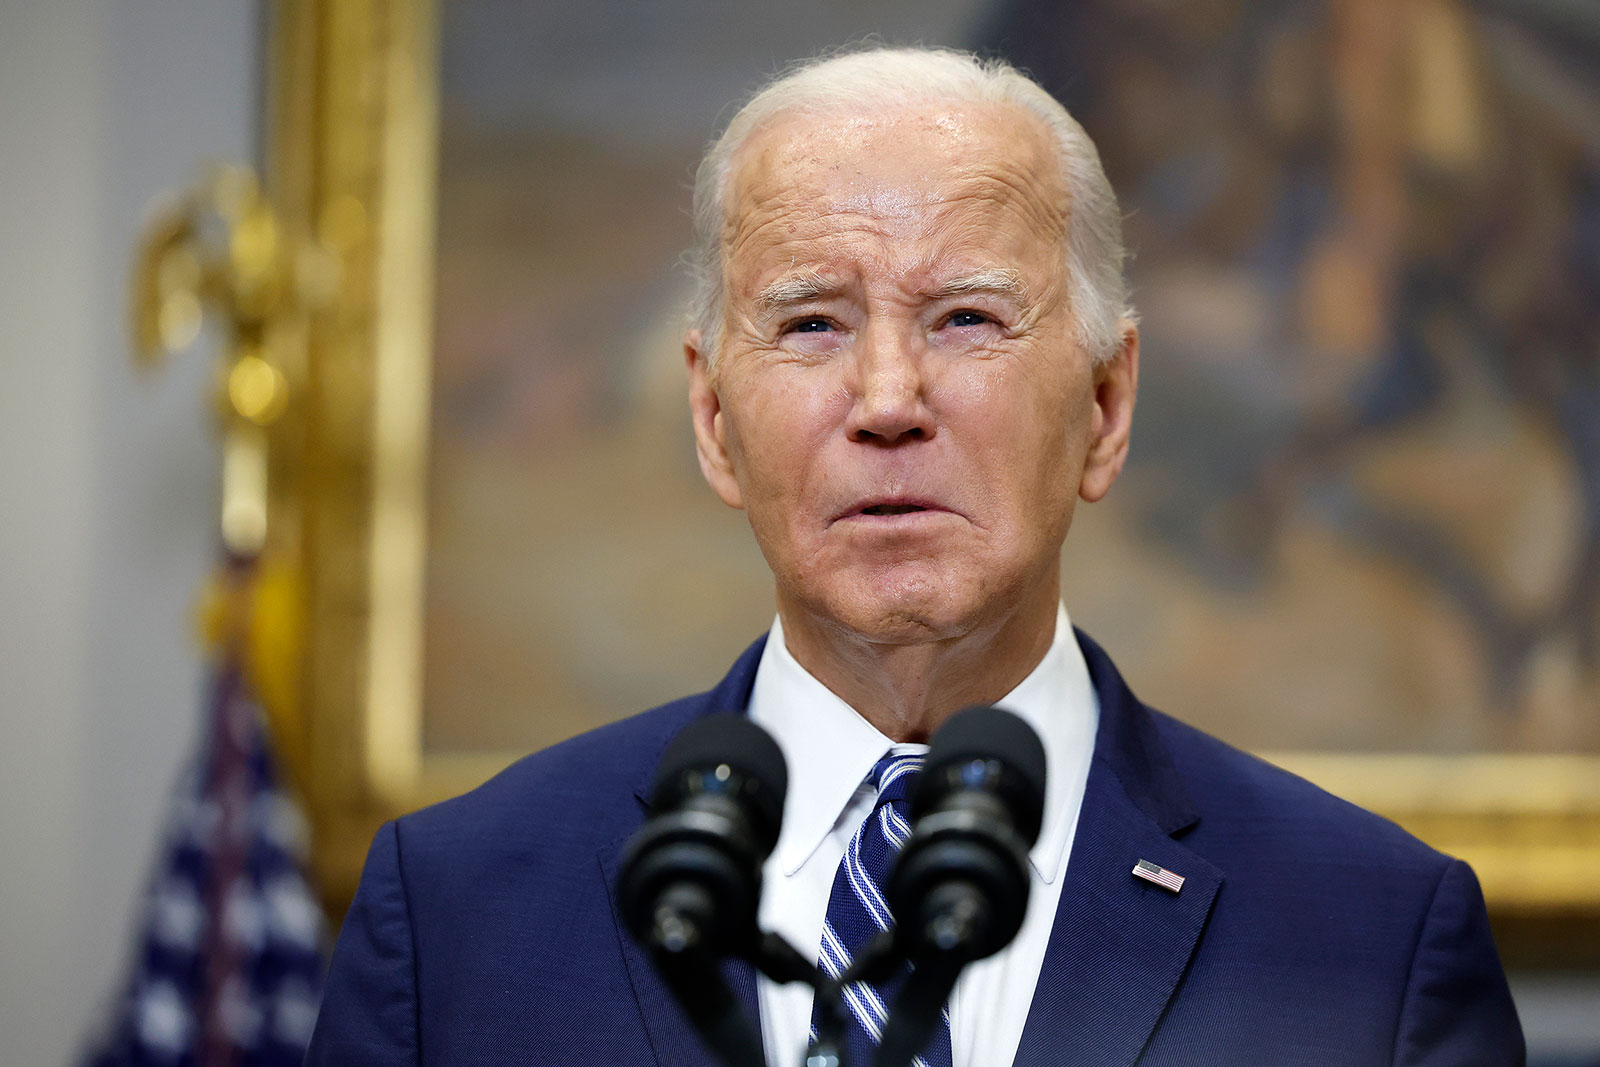 President Joe Biden delivers remarks on the reported death of Alexei Navalny from the Roosevelt Room of the White House on Friday, February 16.